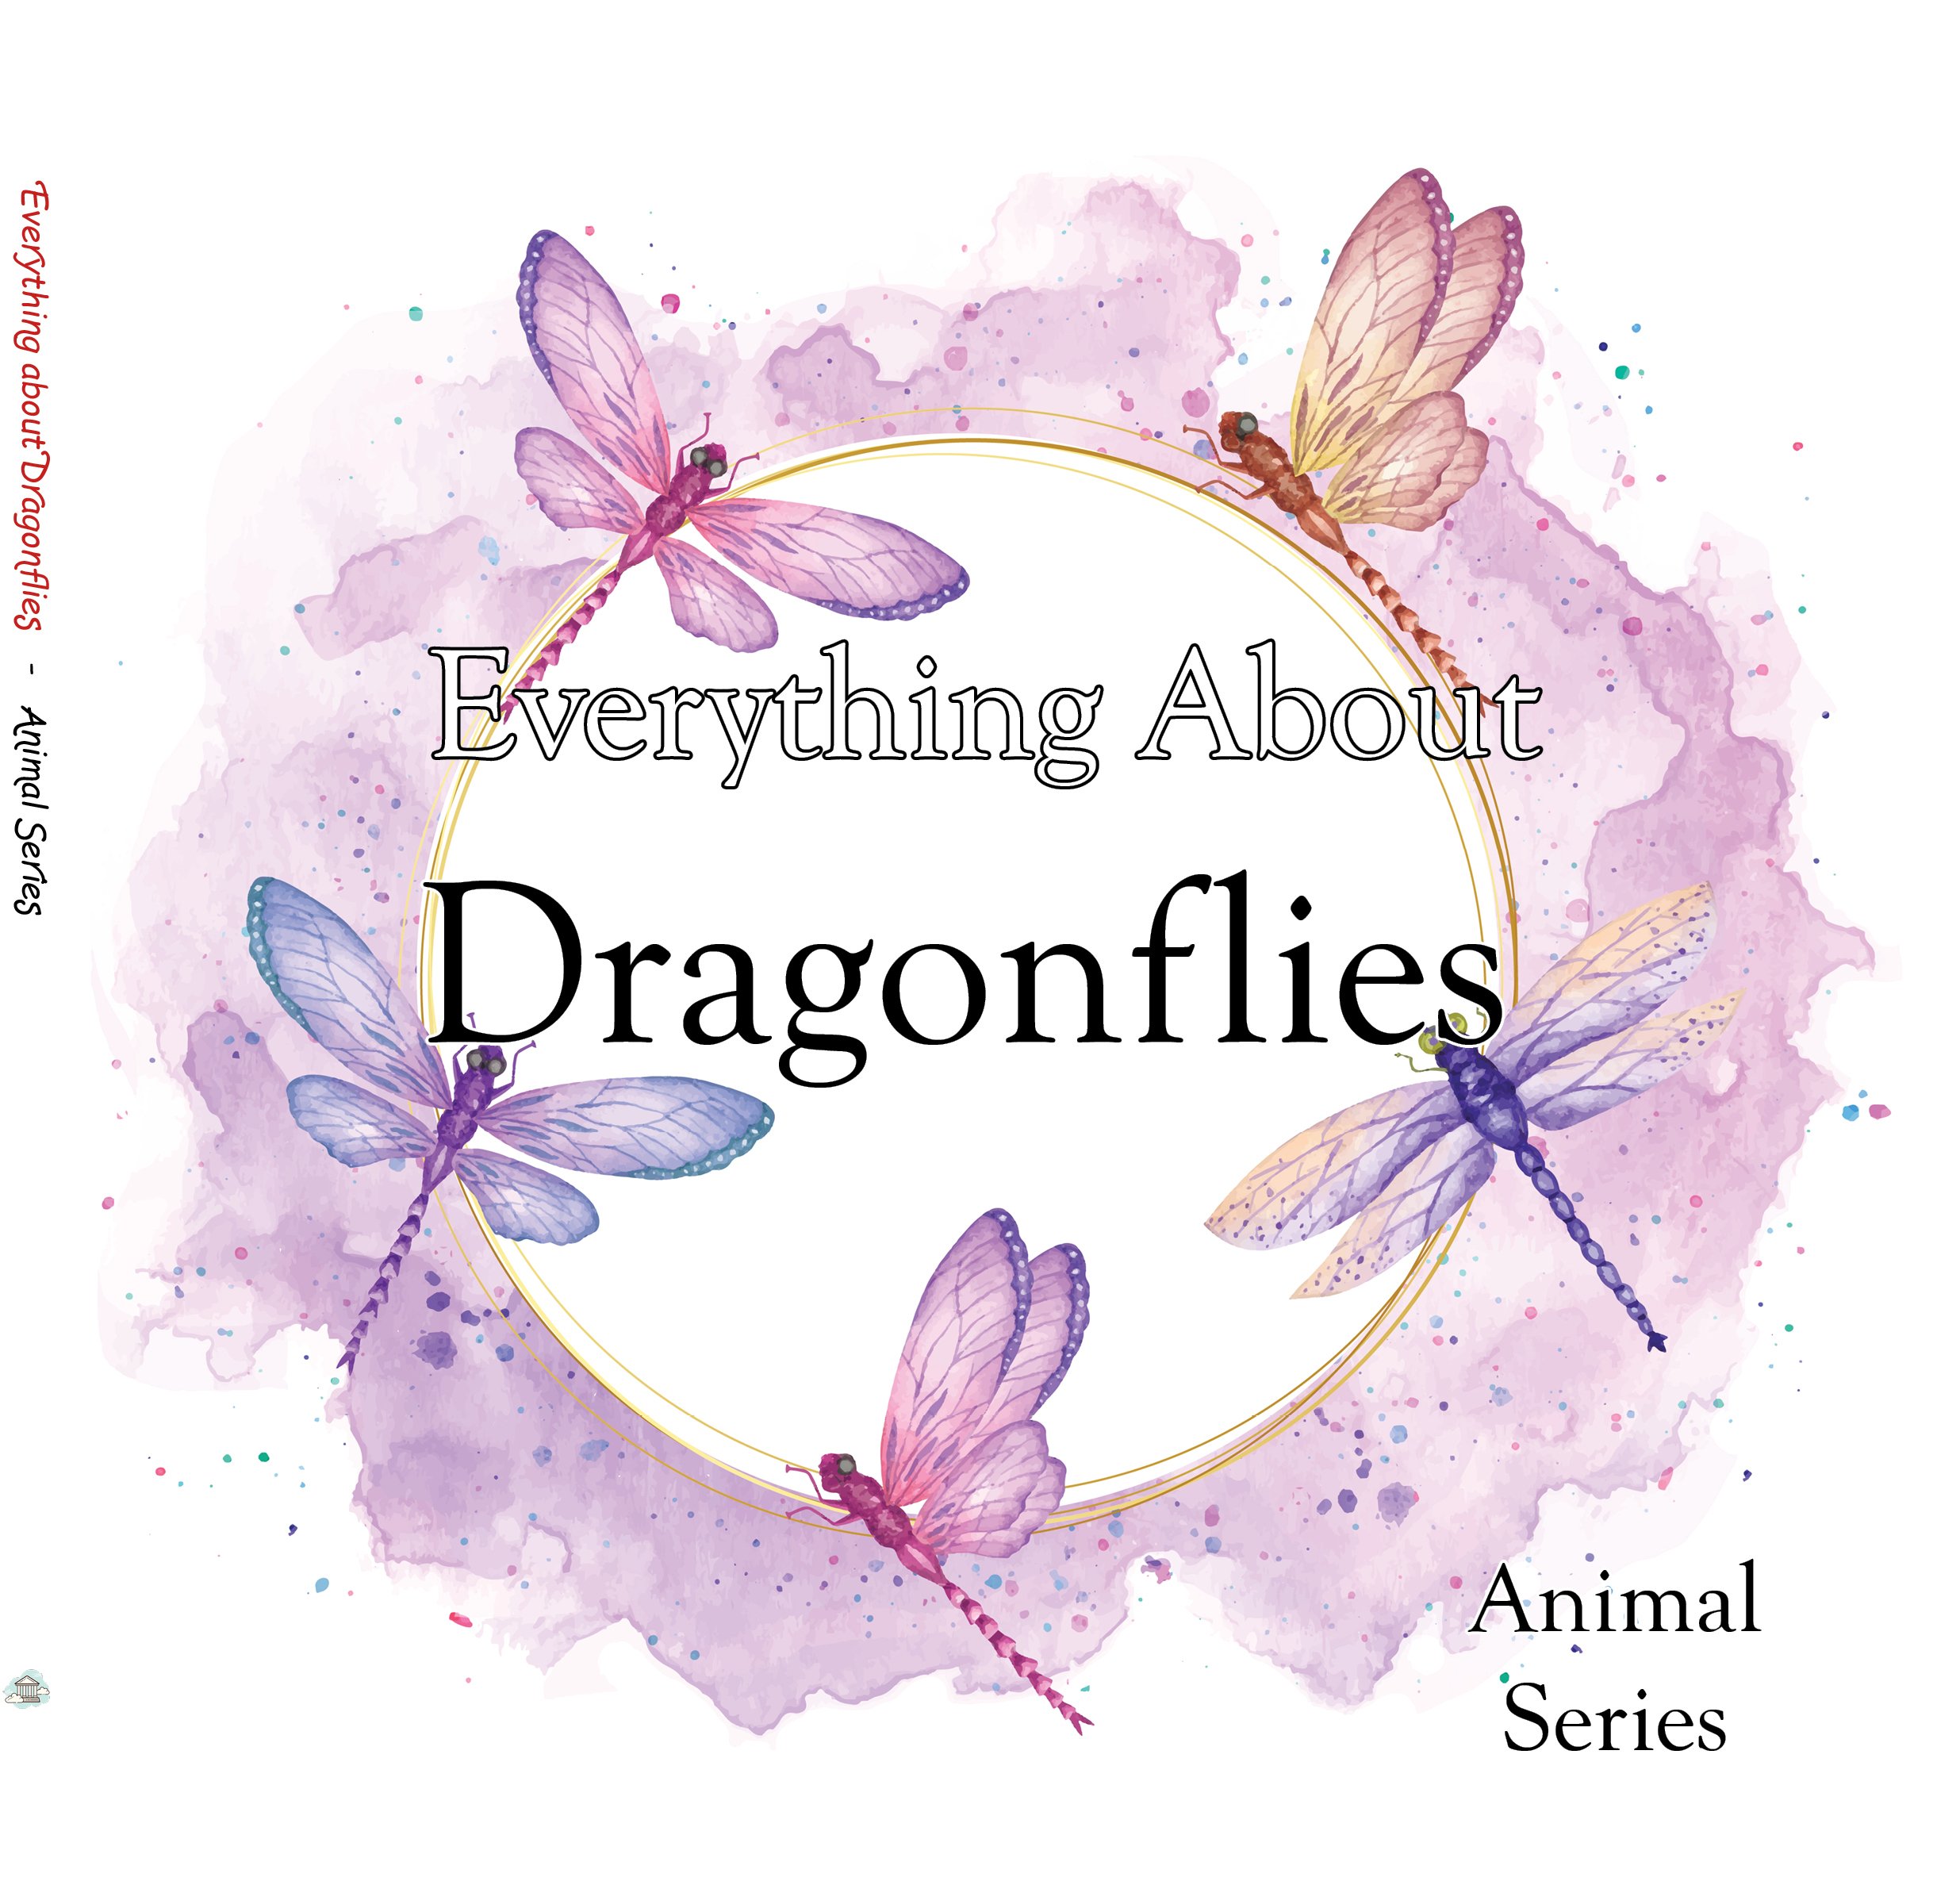 Everything about Dragonflies - Animal Series.jpg